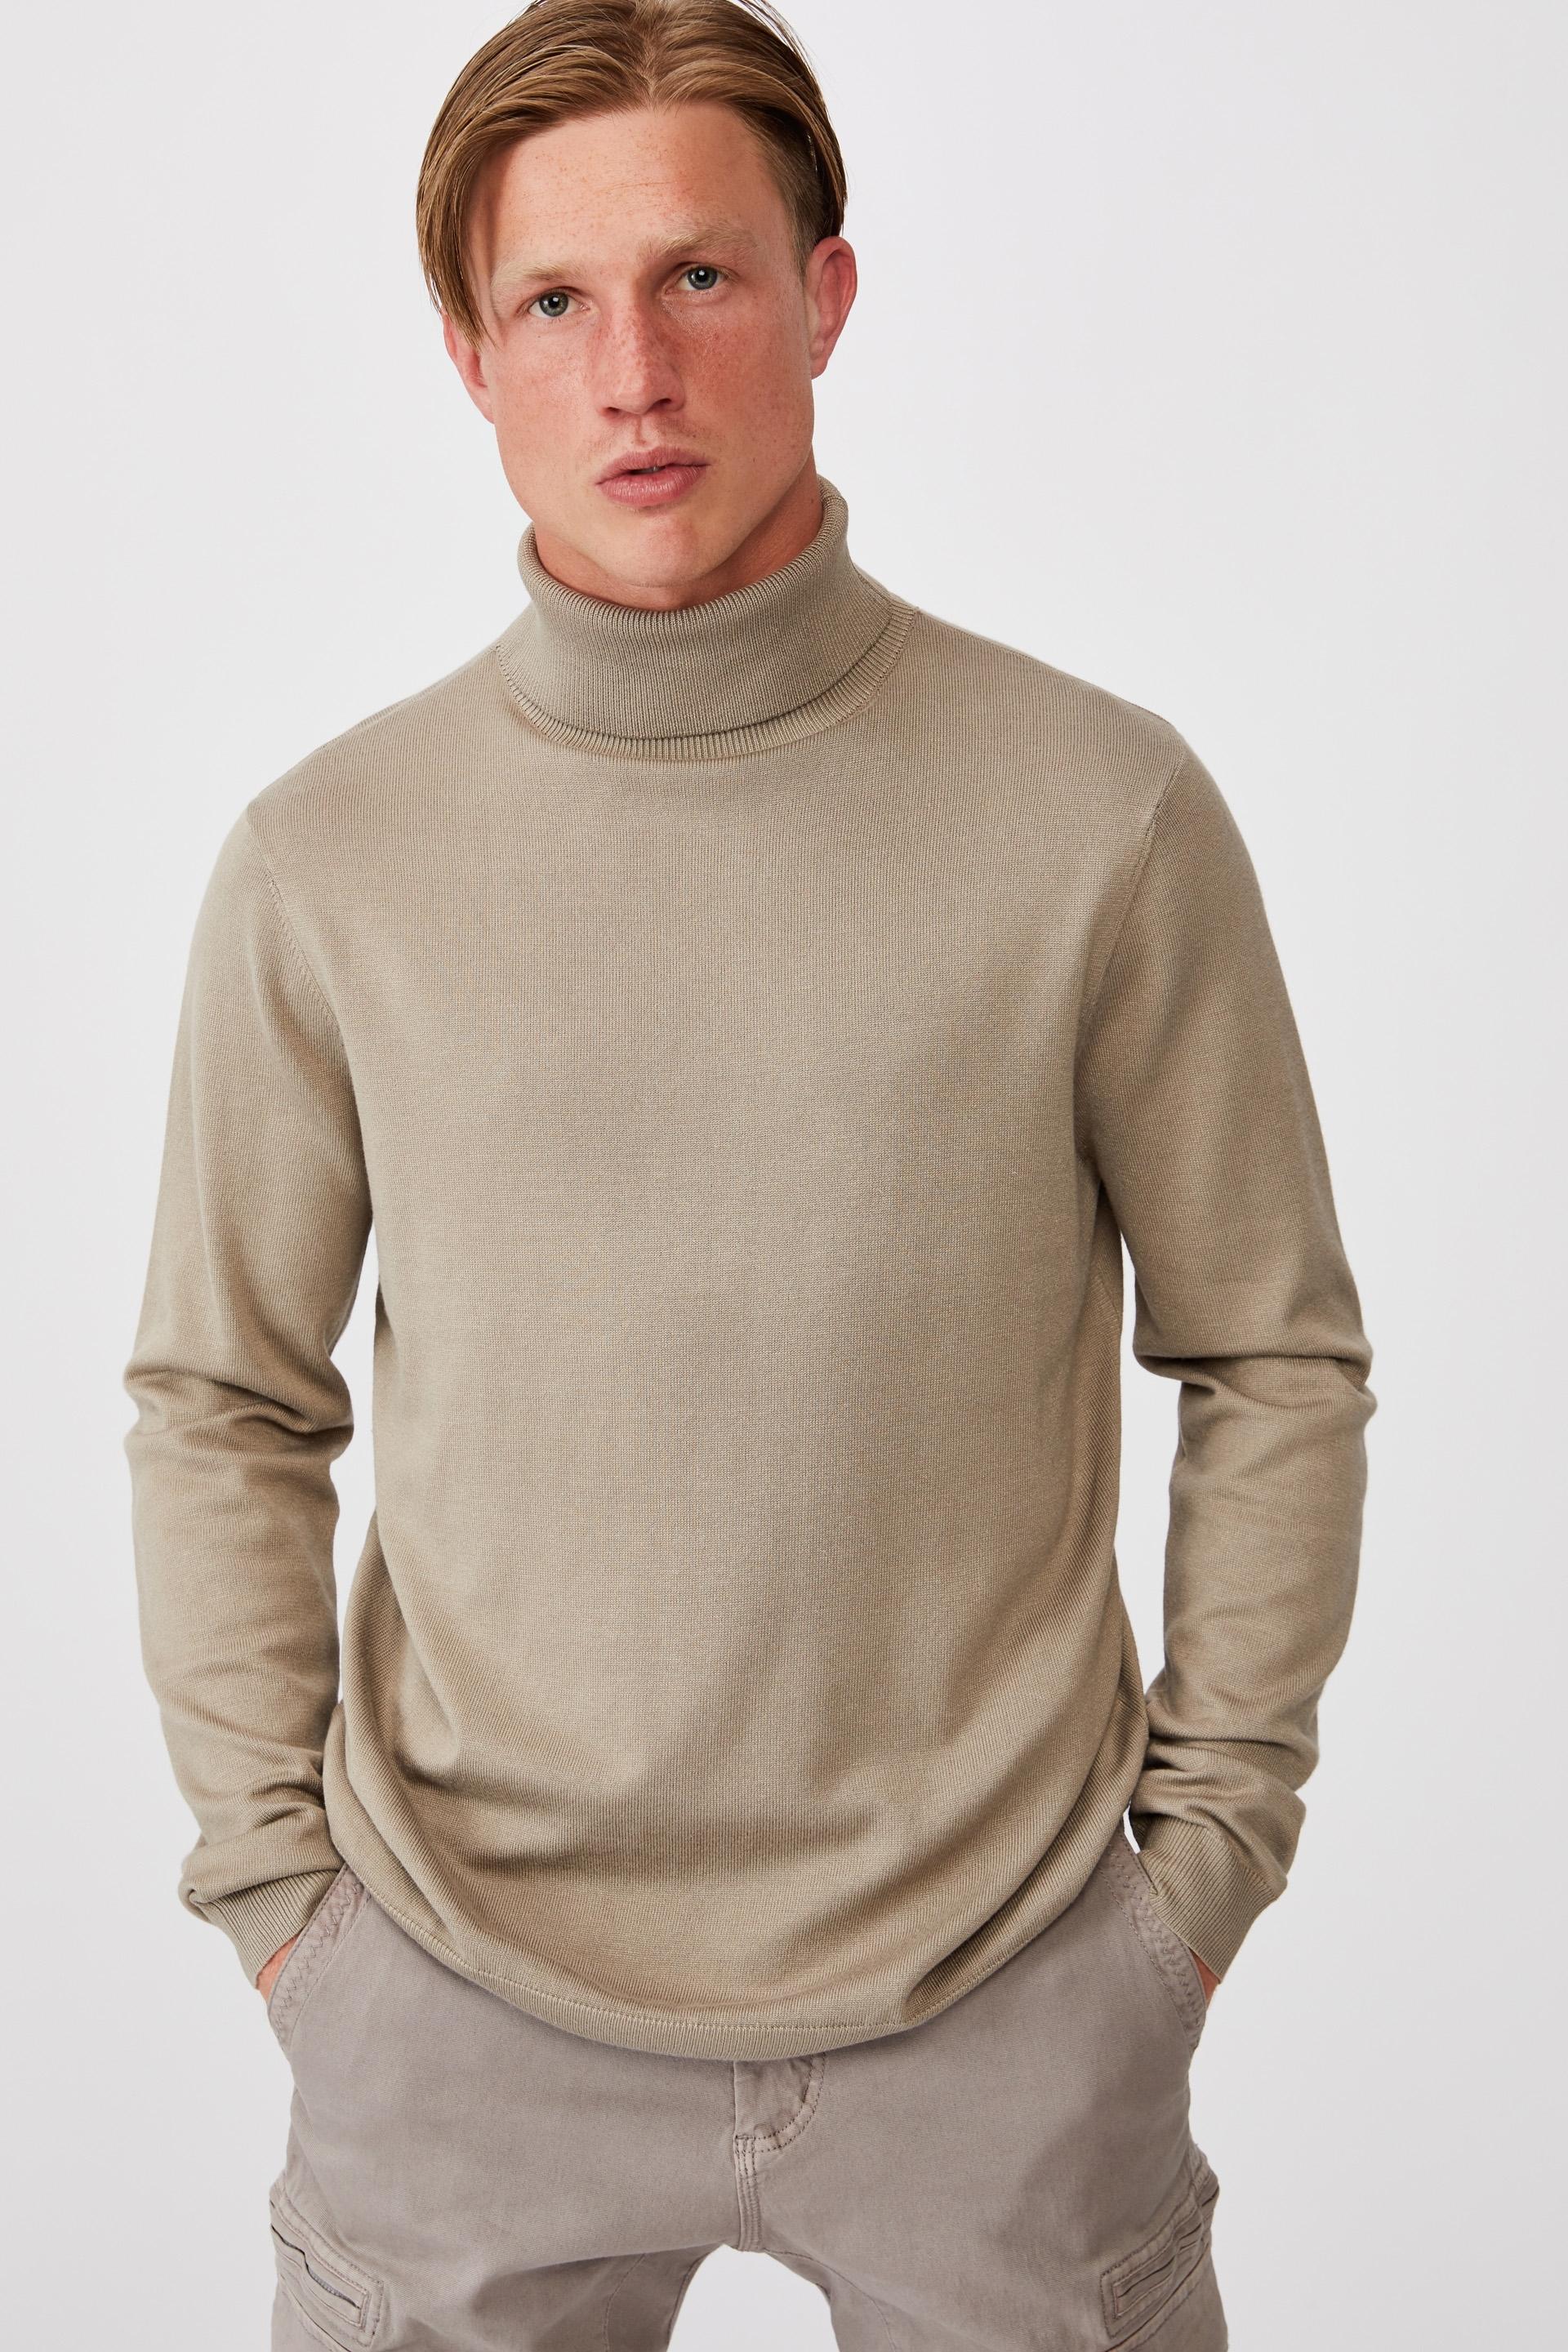 Roll neck sweater - taupe Cotton On Hoodies & Sweats | Superbalist.com